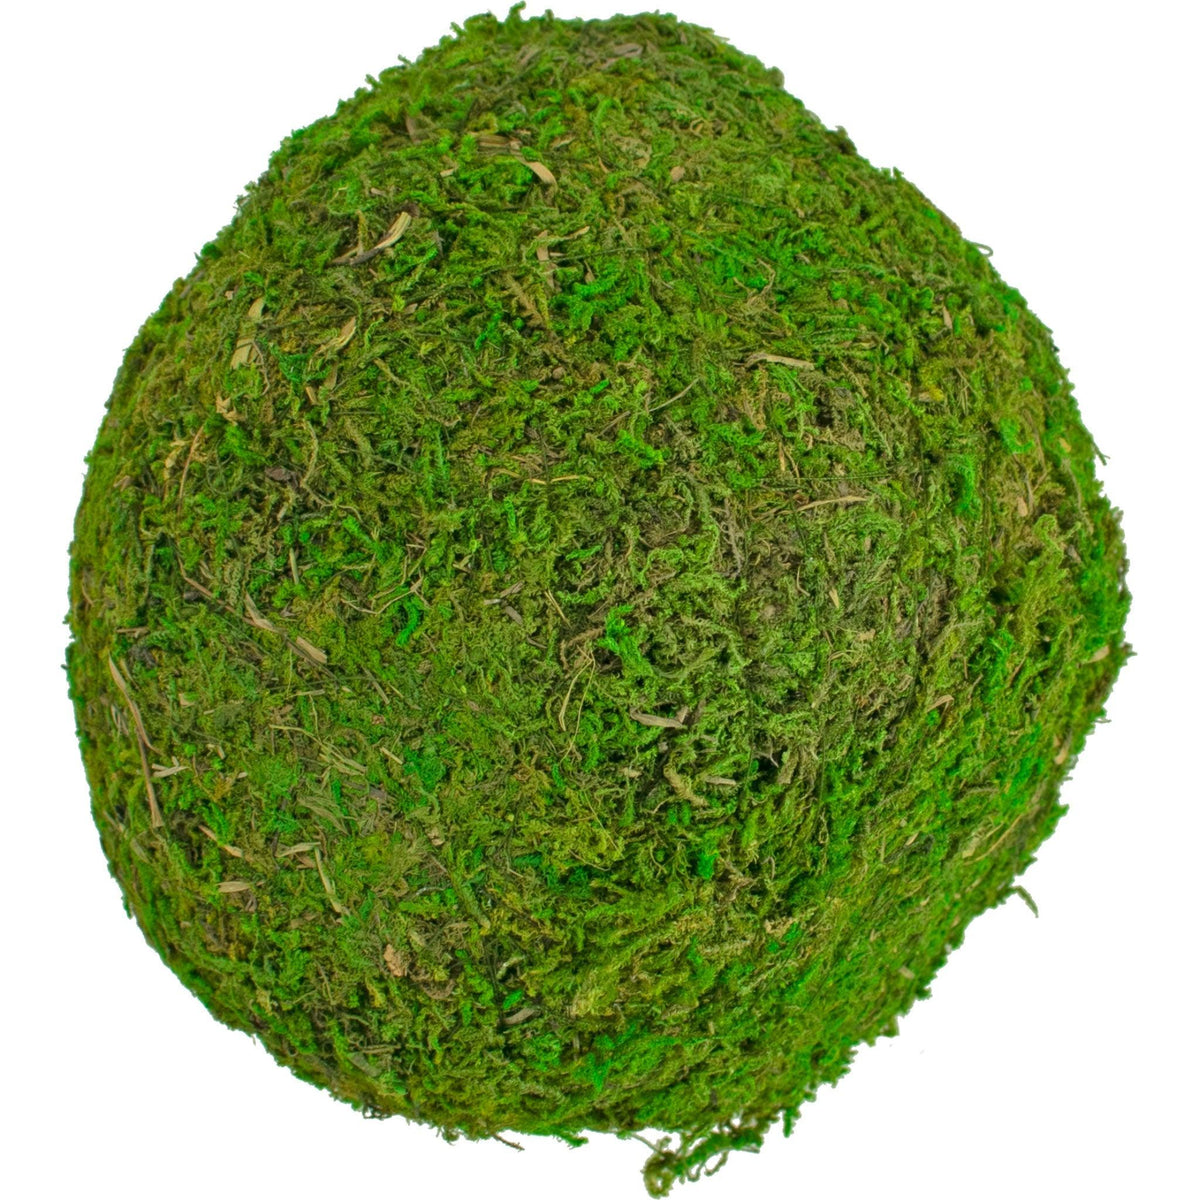 Purchase a brand new bundle of real natural green moss balls for your rustic home decor accents and centerpieces.  Sold now at leedisplay.com